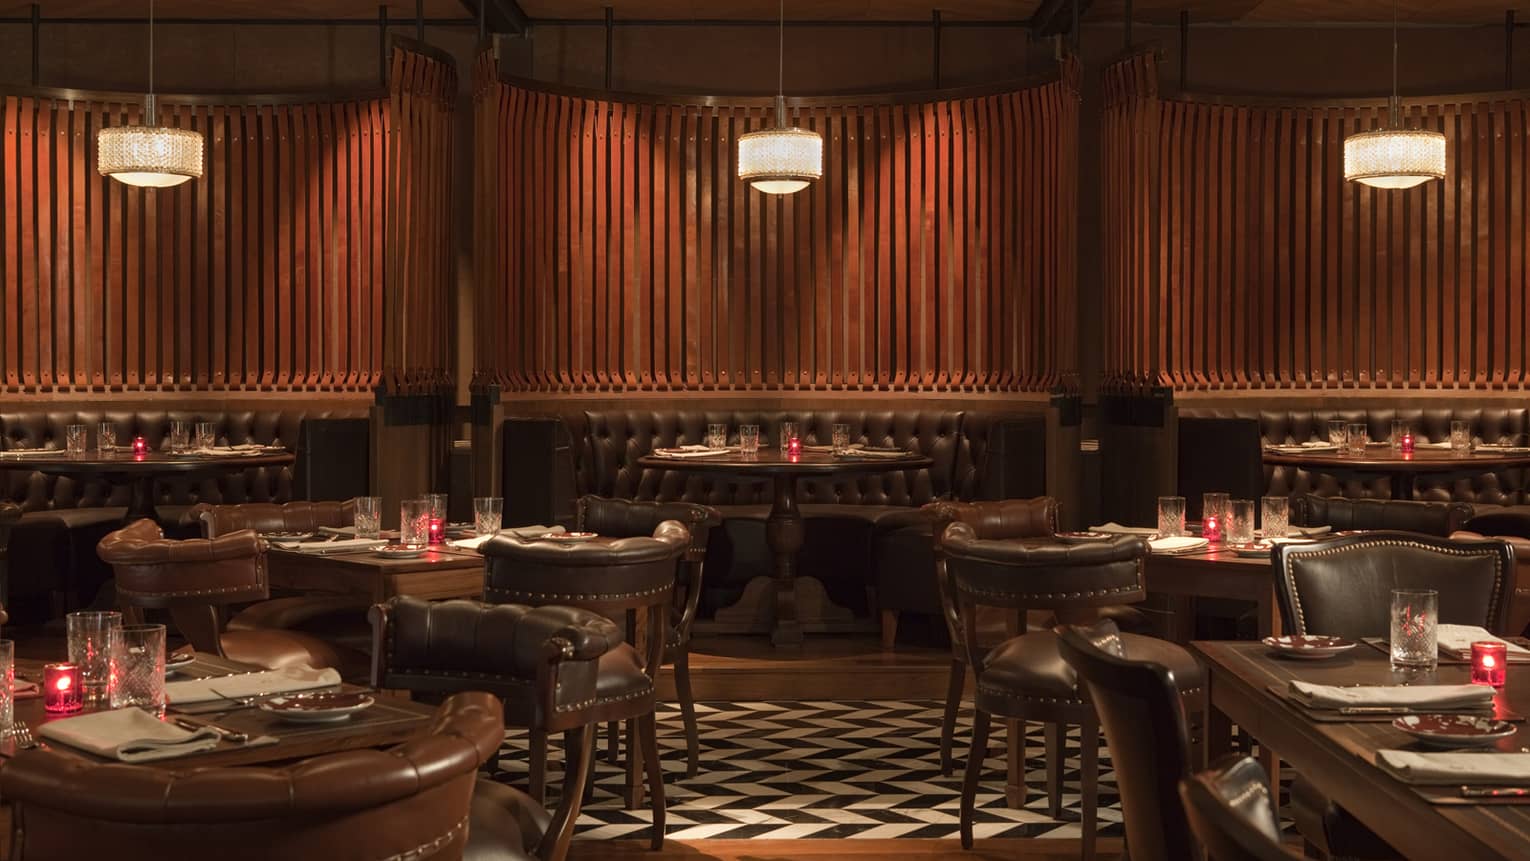 Elena crescent-shaped dark leather booths, leather cocktail chairs and tables, black-and-white tile floor